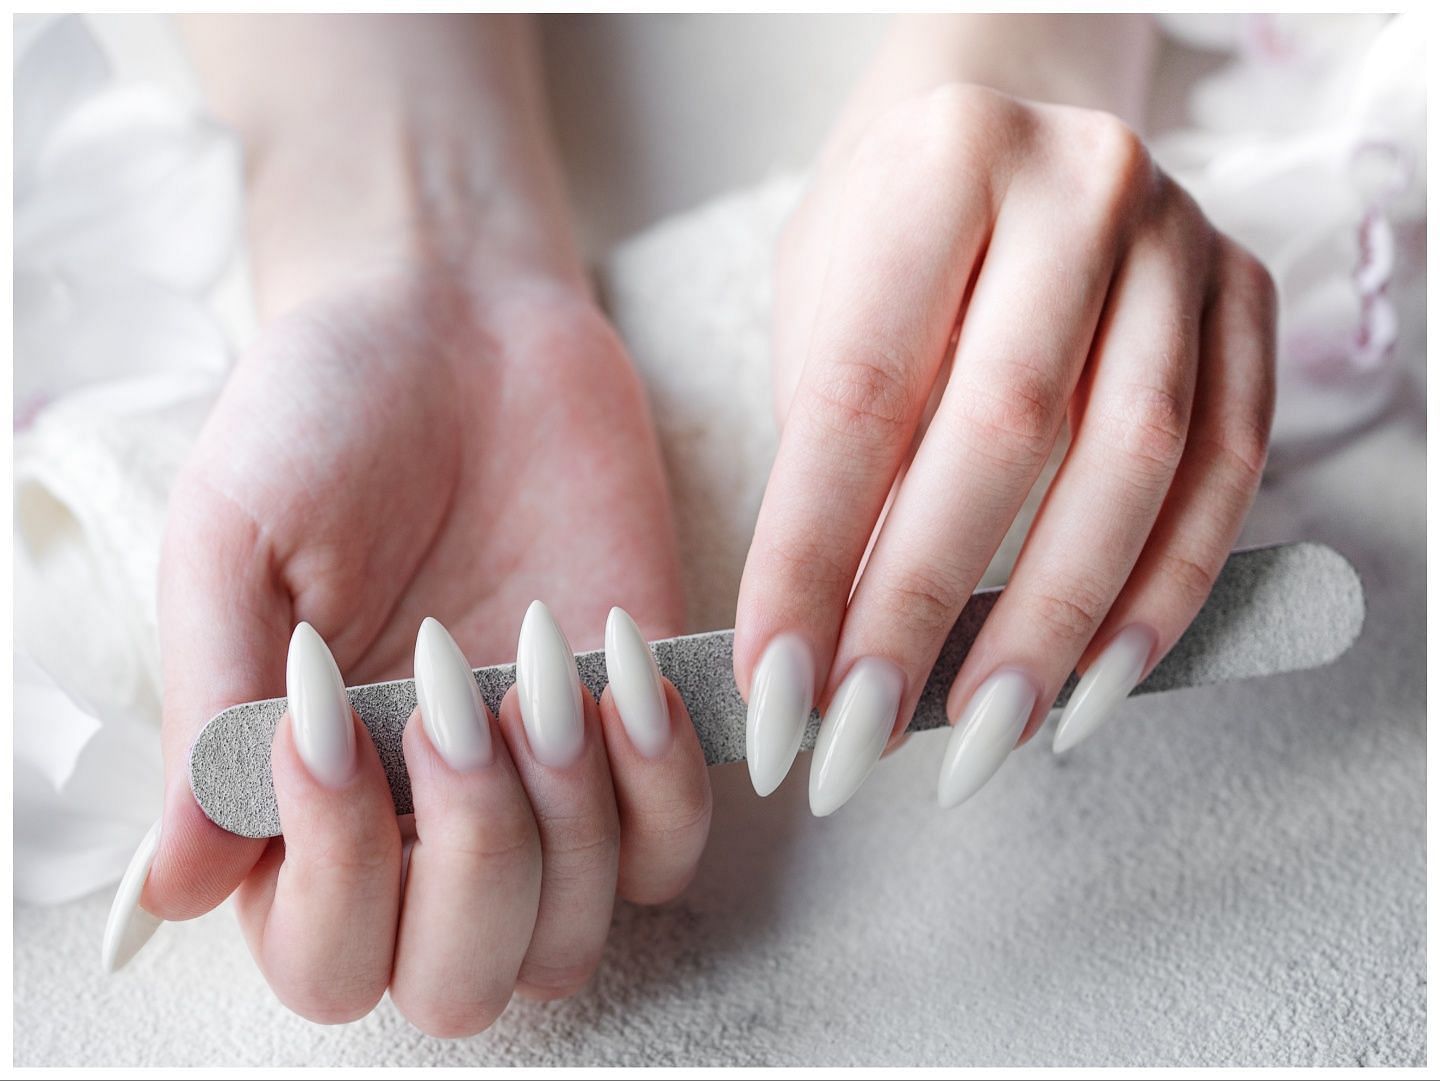 How unhygienic nails can be risky (Image via Vecteezy)